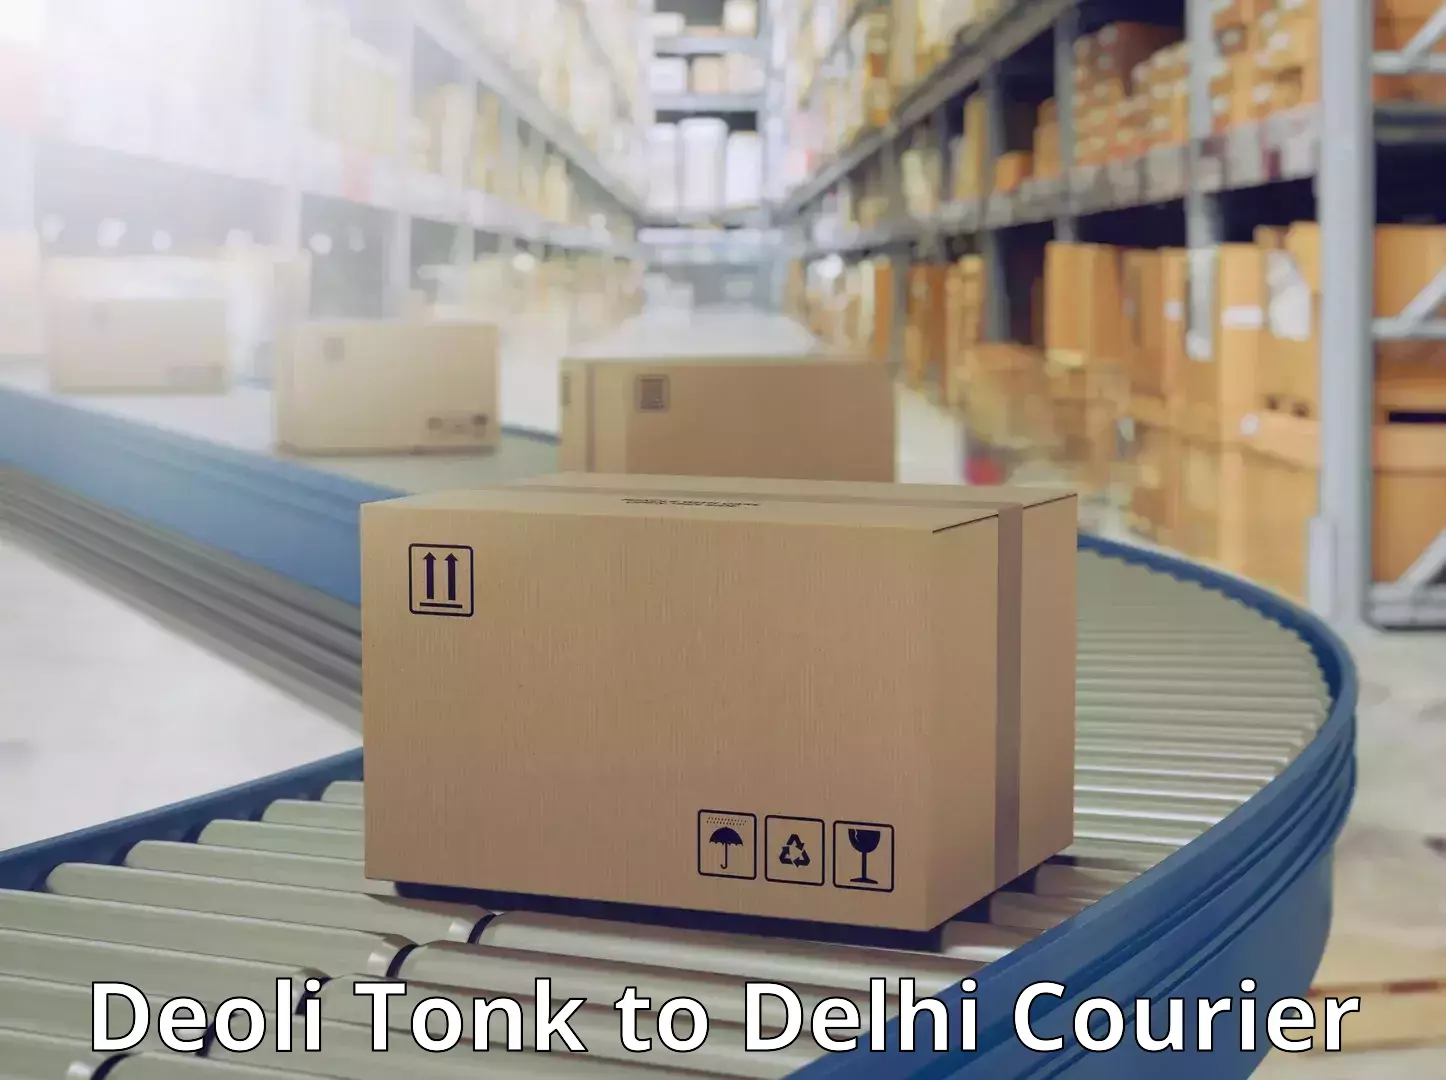 Global shipping networks Deoli Tonk to Lodhi Road